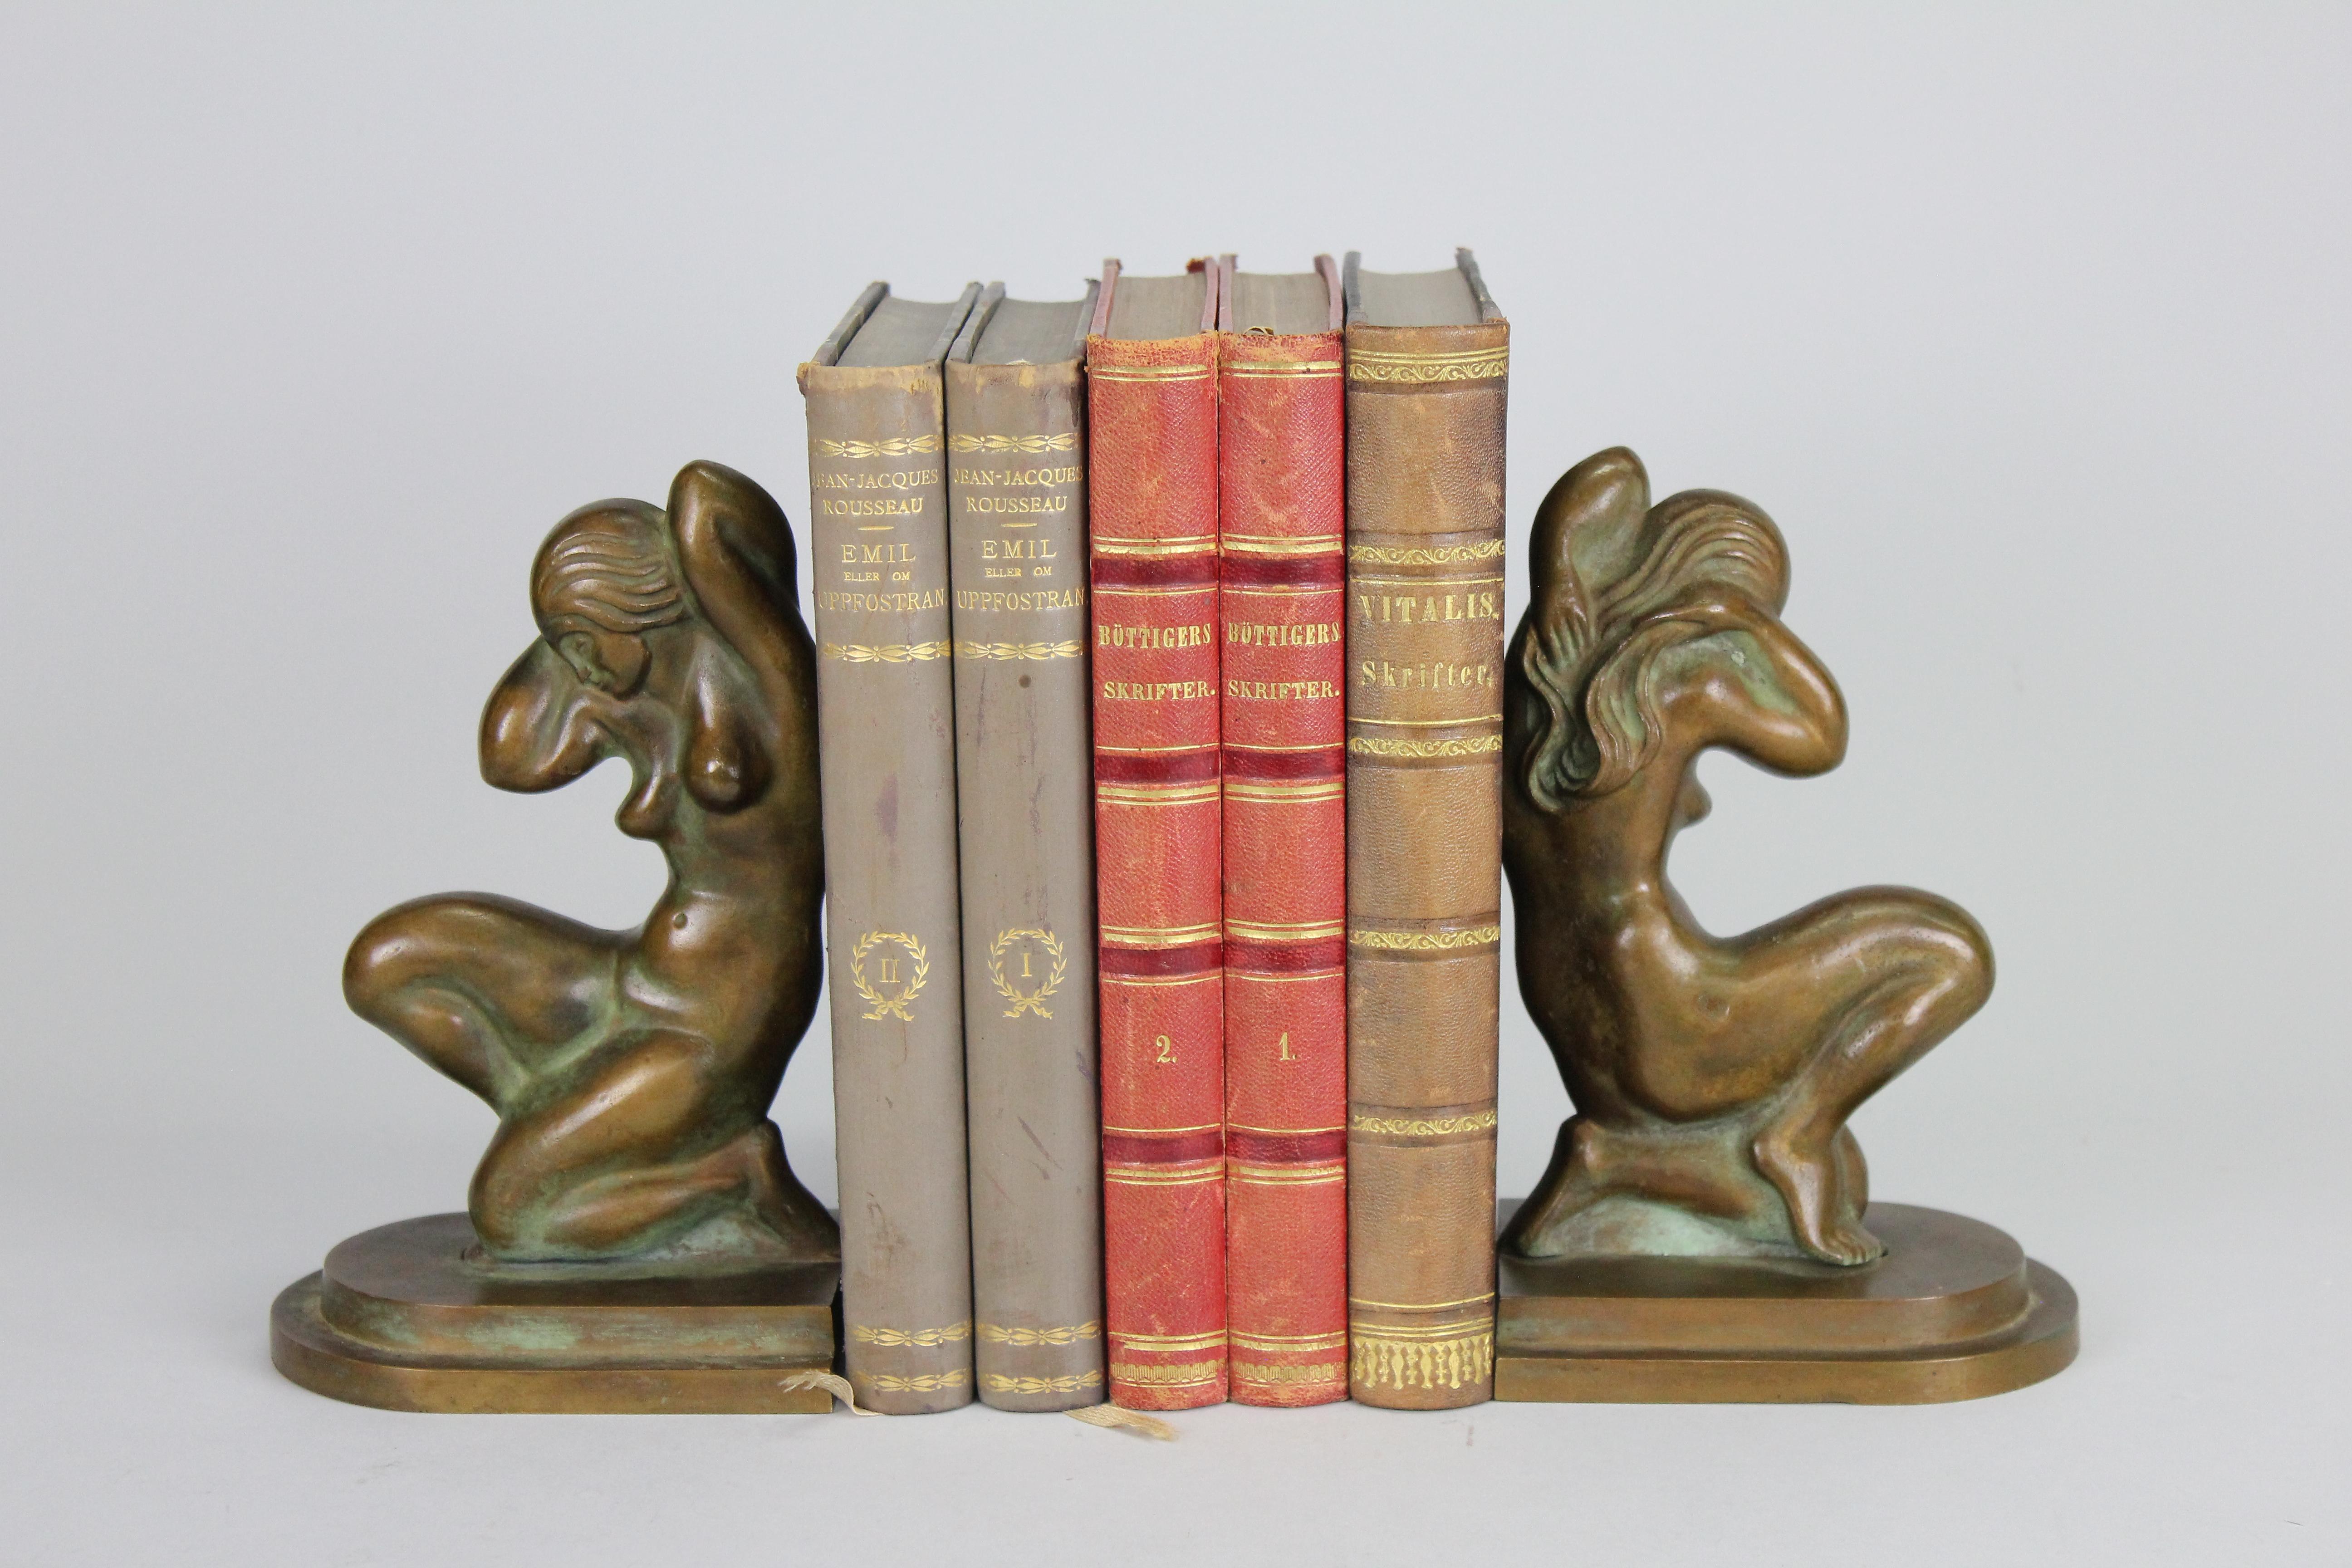 A wonderful pair of bronze bookends.
Made in Denmark by Tinos for Eylon Helsingborg, Sweden.
The bronze has got the original brown patination.
Very good condition.
Signed 